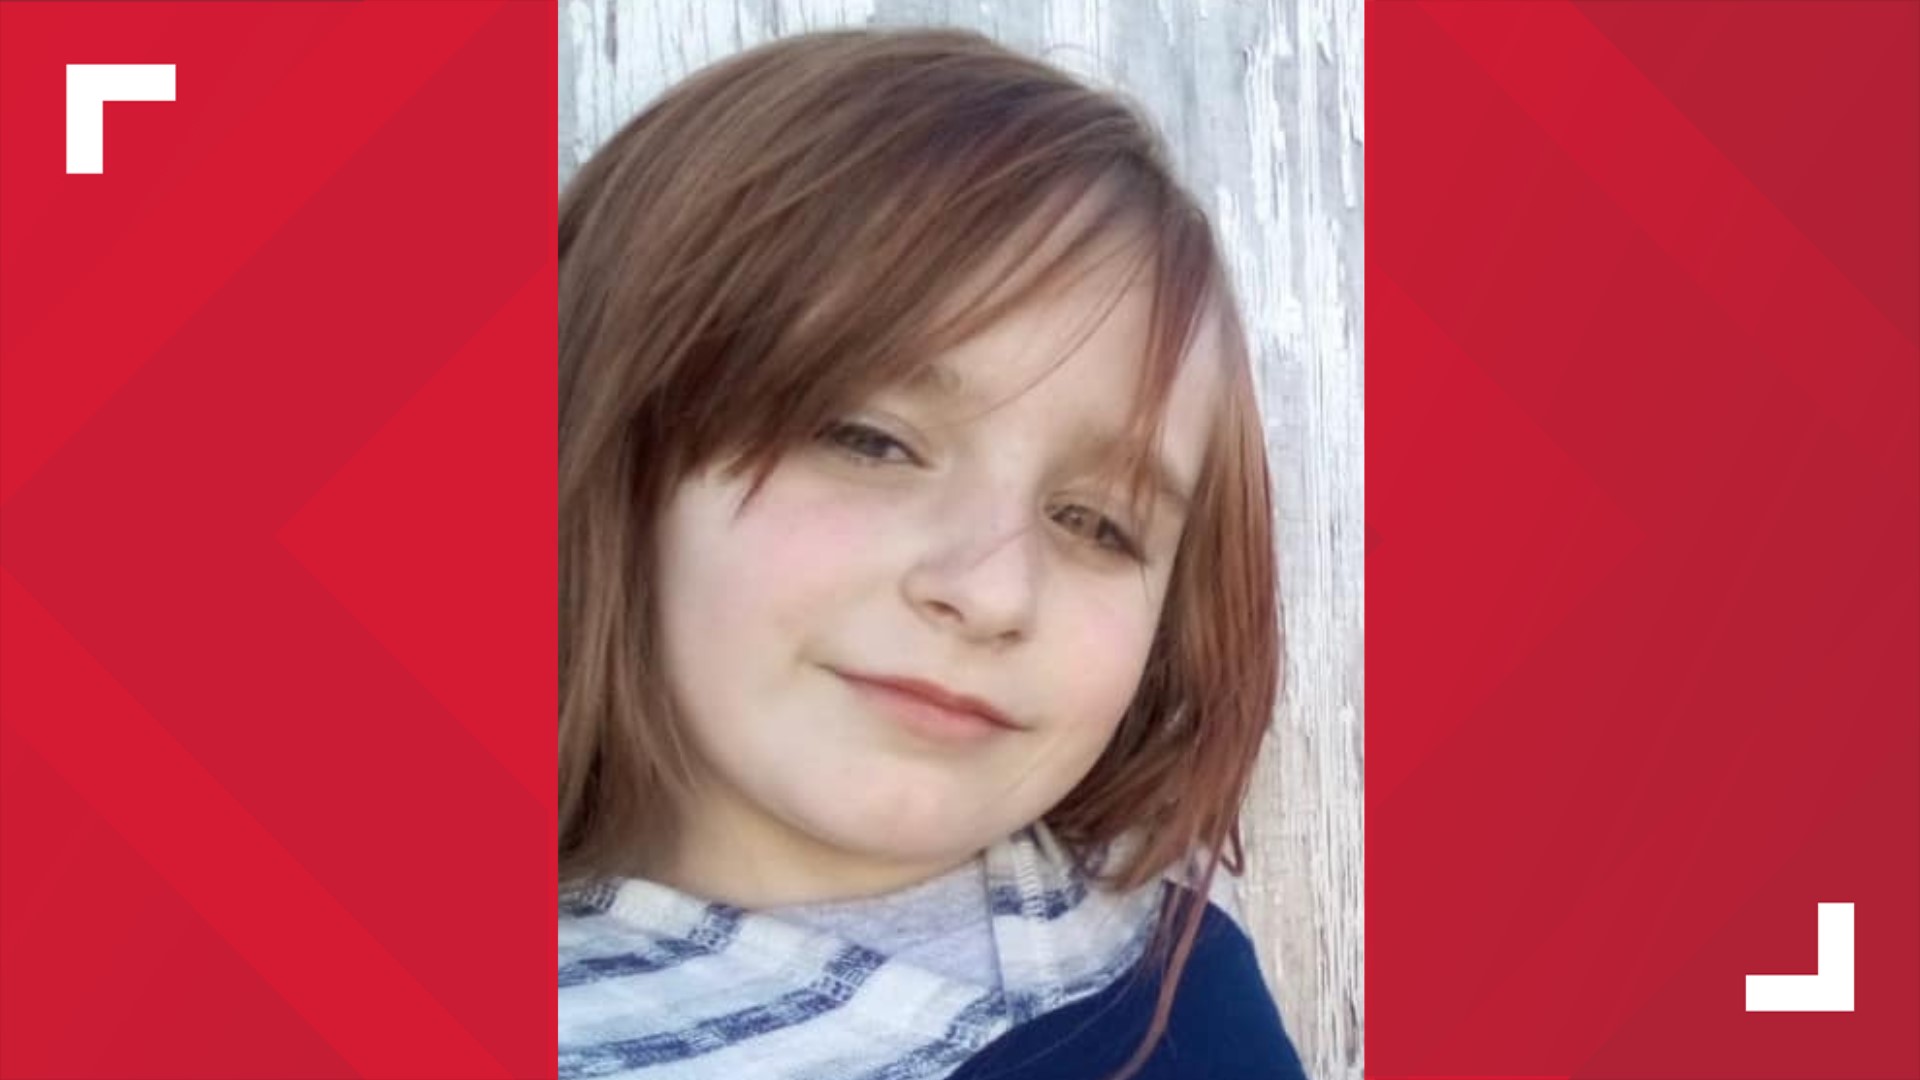 Faye Swetlik was reported missing Monday afternoon after coming home from school